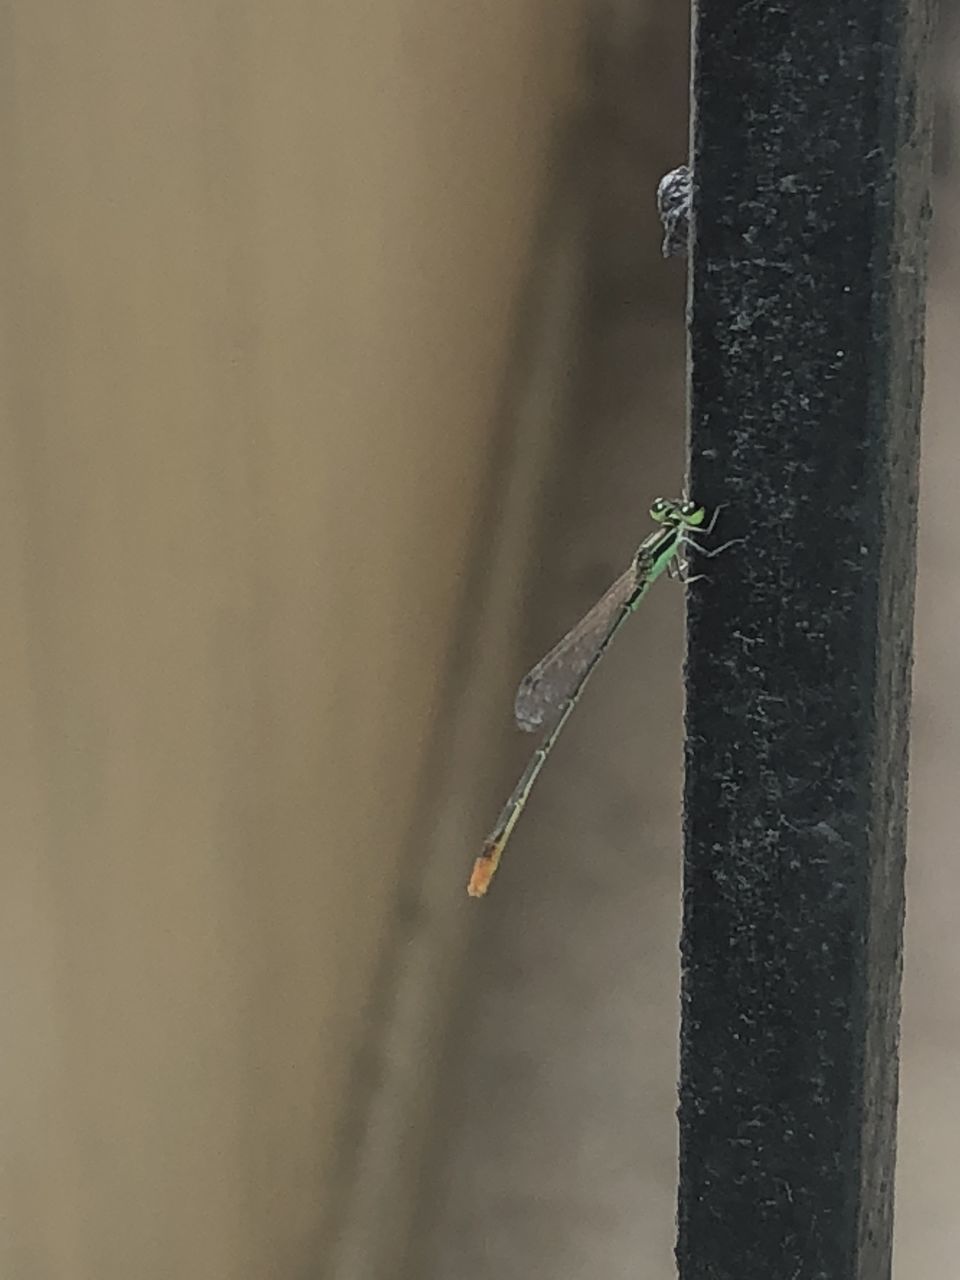 CLOSE-UP OF INSECT ON PLANT BY WALL